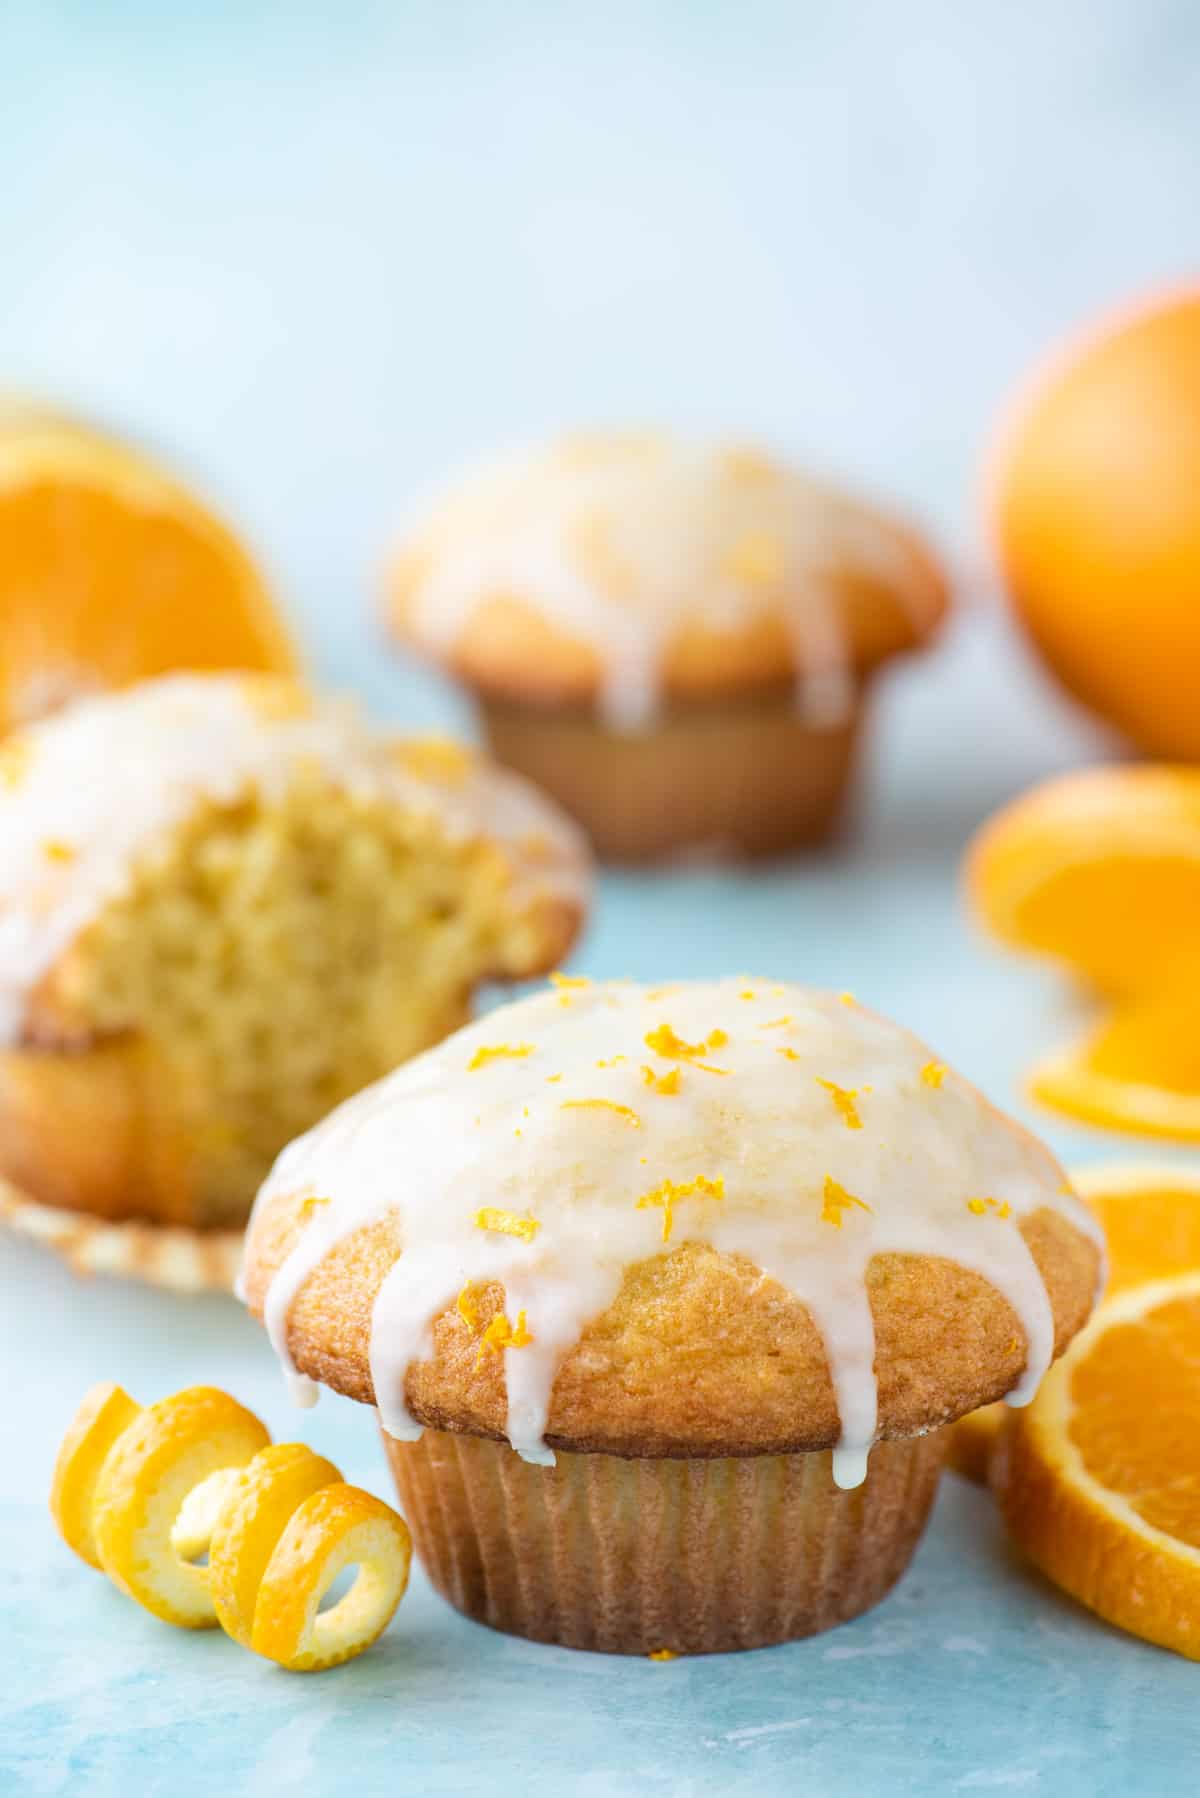 orange muffin surrounded by more muffins and orange slices on blue background 